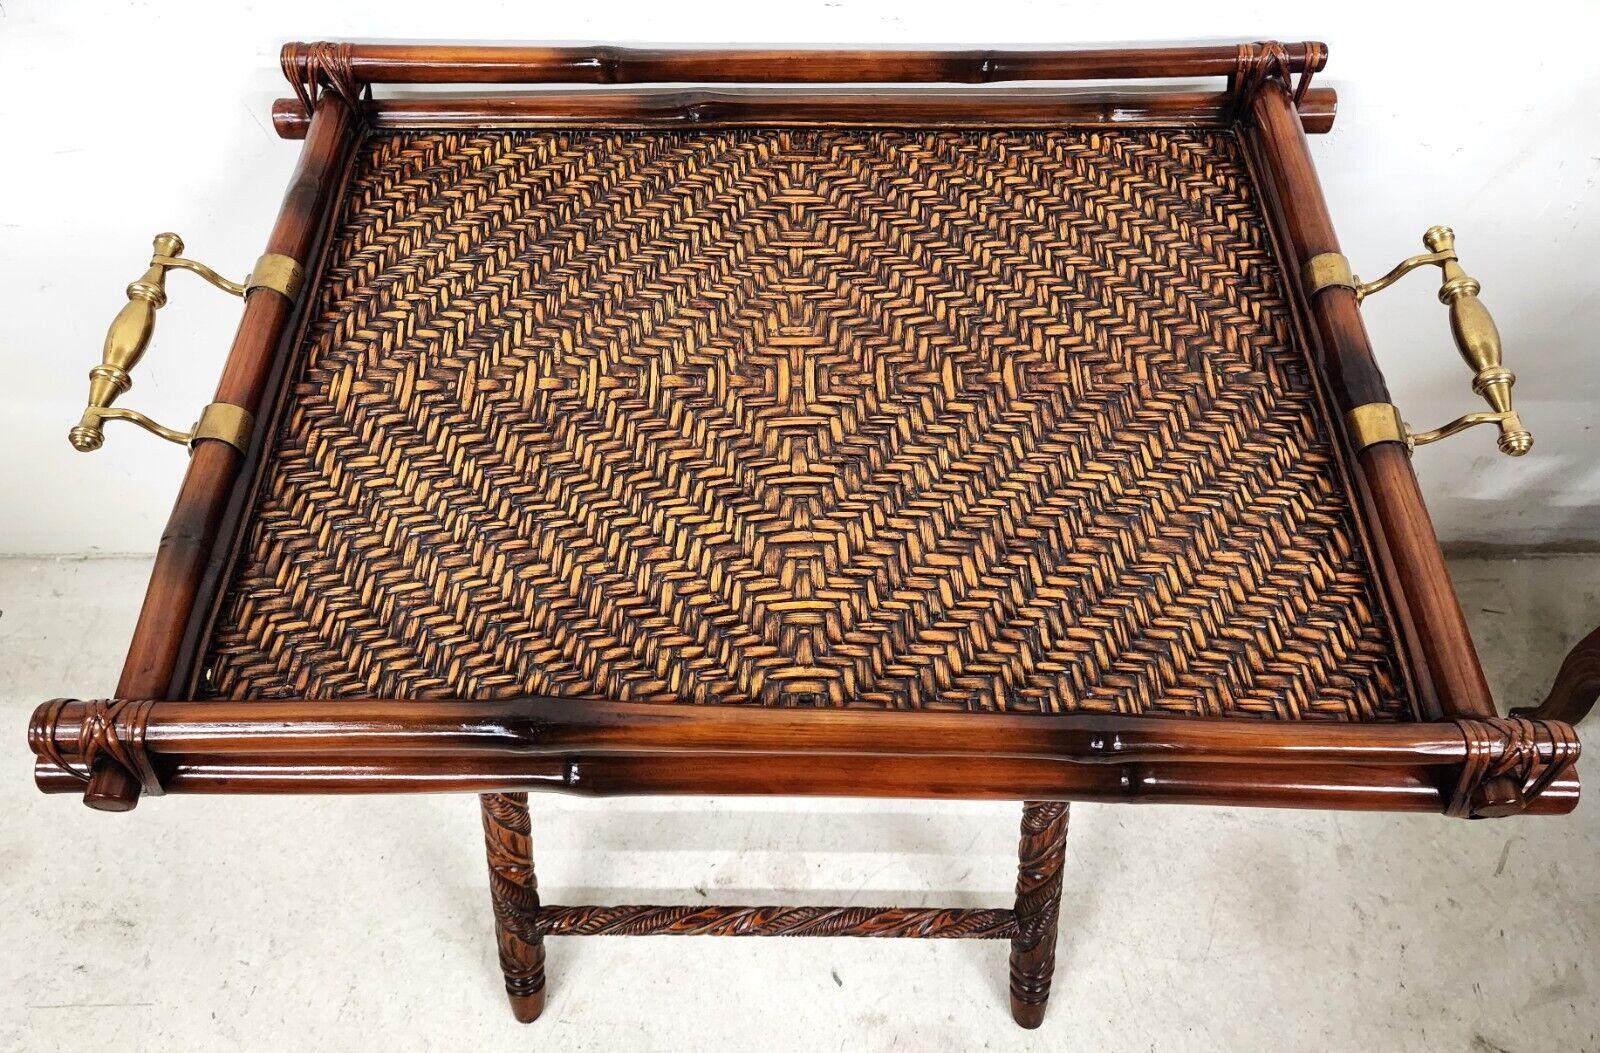 For FULL item description click on CONTINUE READING at the bottom of this page.

Offering One Of Our Recent Palm Beach Estate Fine Furniture Acquisitions Of A
RALPH LAUREN British Colonial Style Butler Serving Tray Table

Approximate